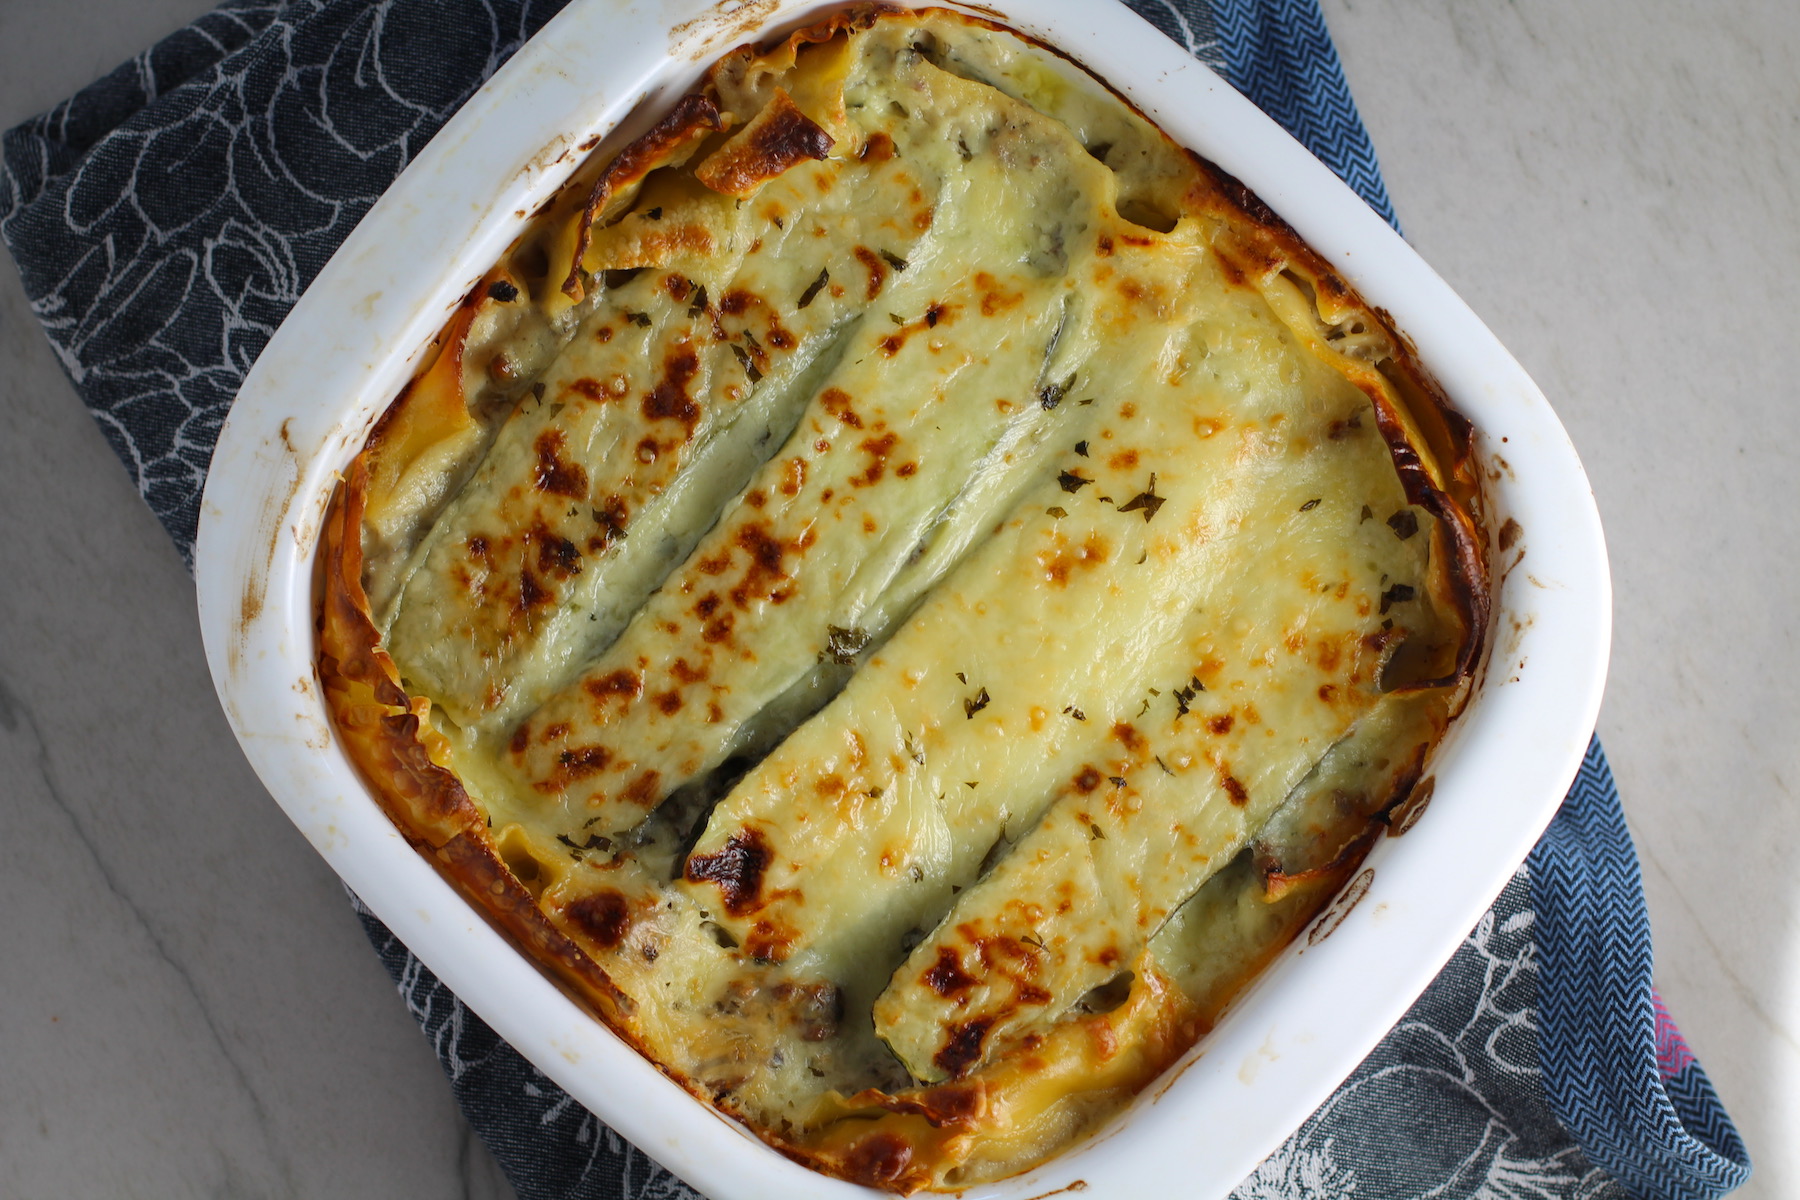 White Lasagna Recipe with Zucchini and Ground Beef with browned melted cheese on top in casserole dish! It's a make-ahead family dinner! It's creamy, hearty, and delicious with layers of noodles, zucchini, ground beef, creamy cheese, and a silky white sauce. 